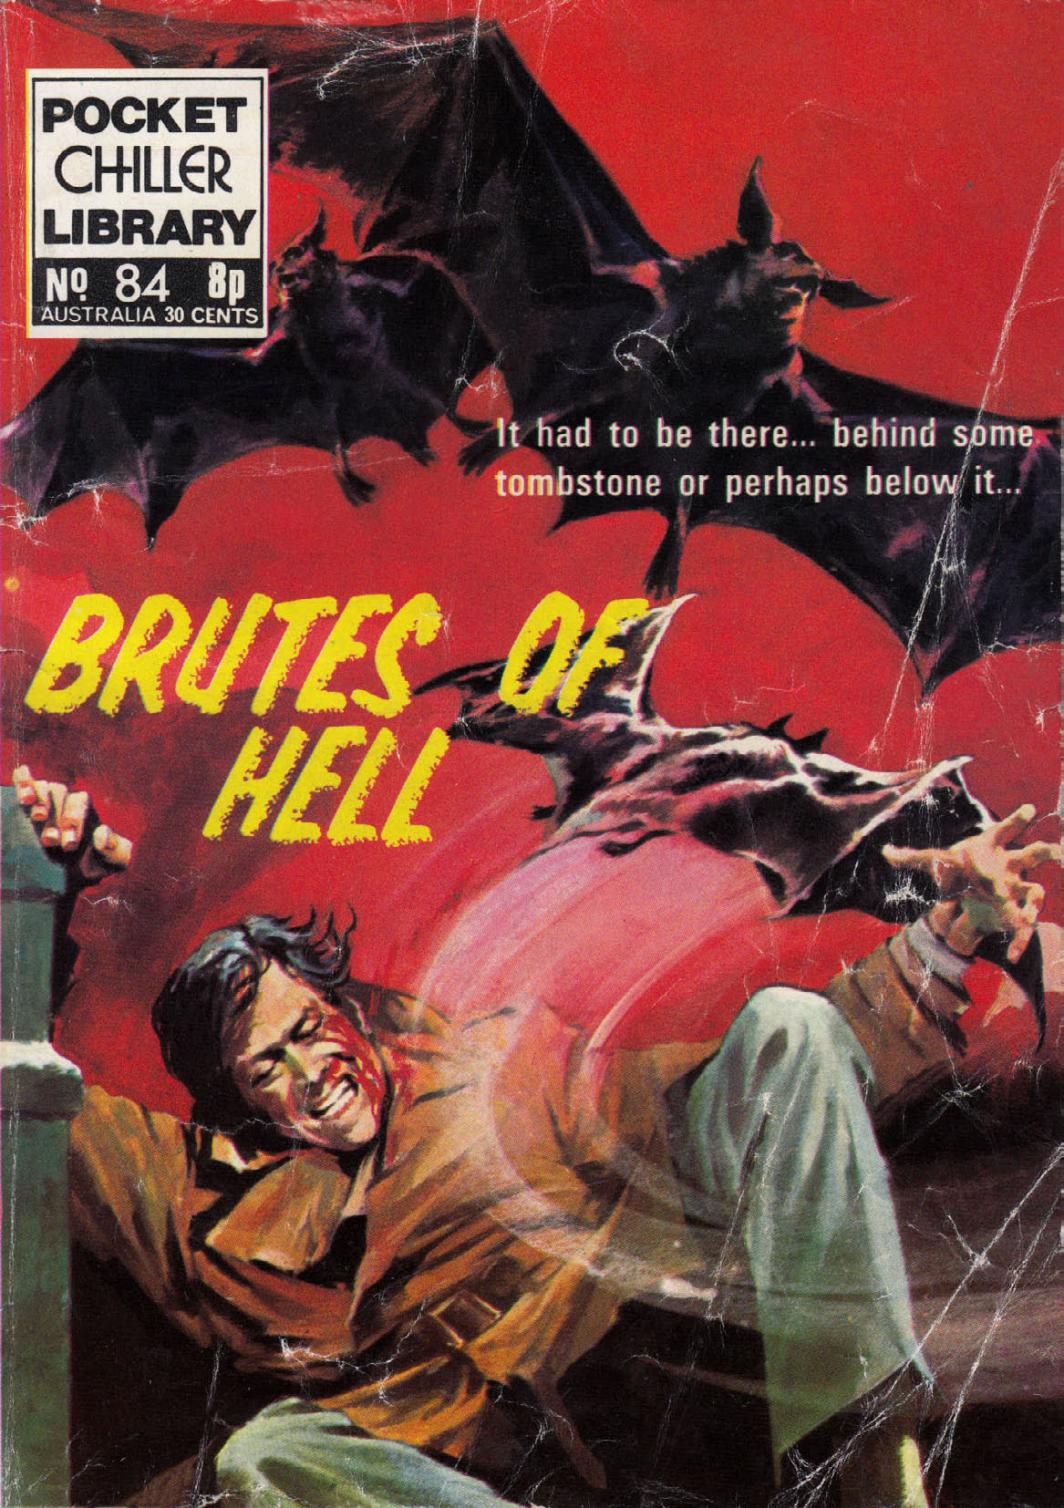 Pocket Chiller library 84 - Brutes of Hell